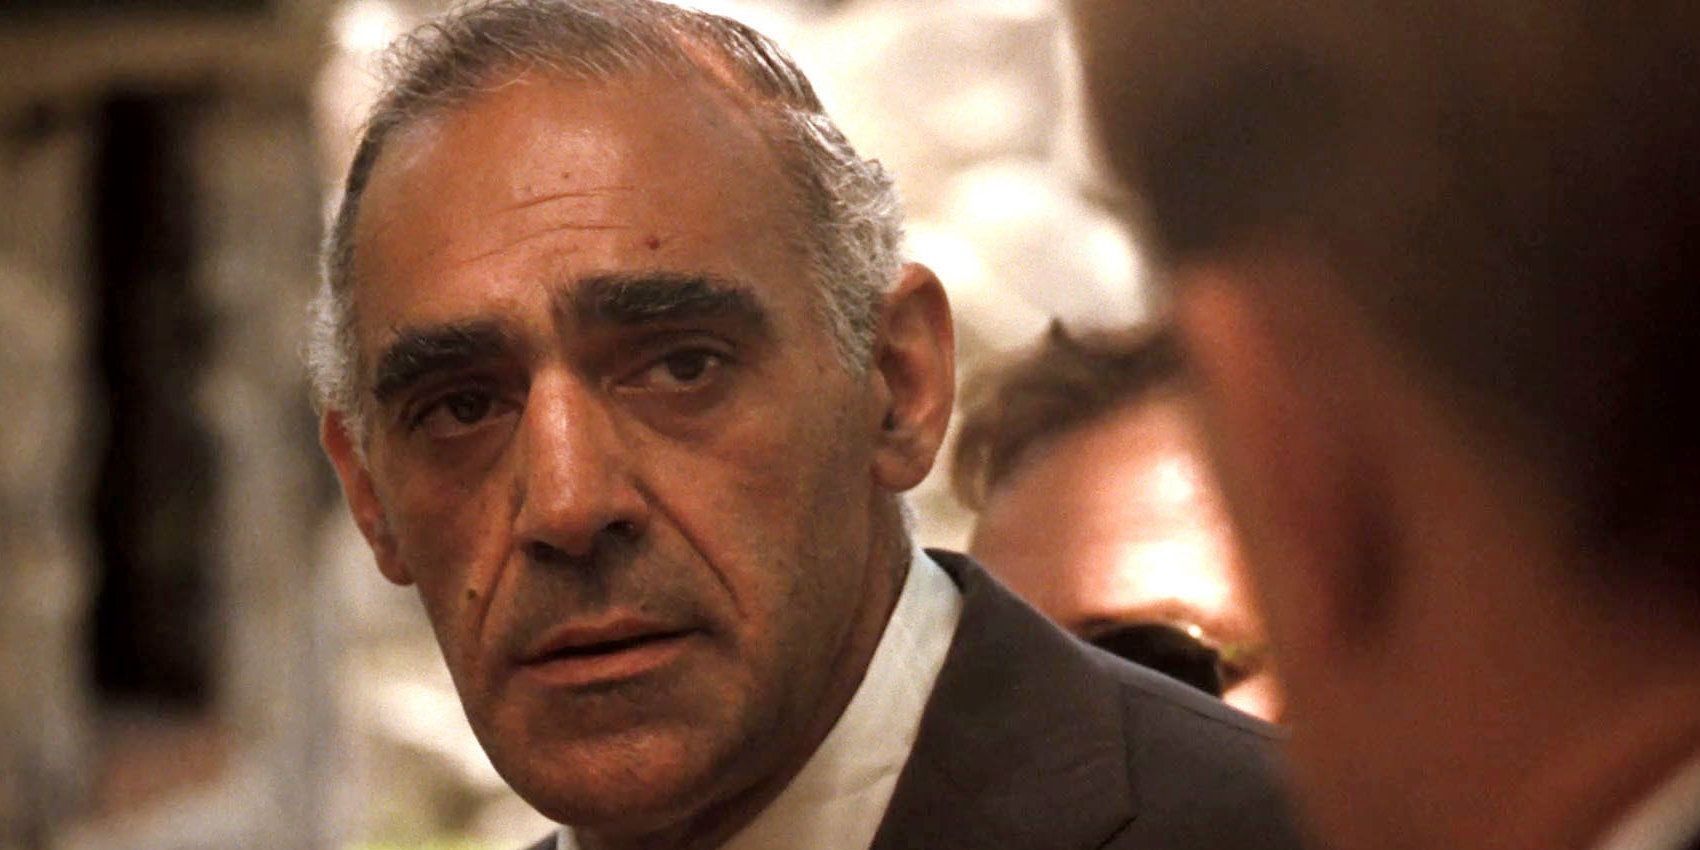 The Godfather: Every Major Character Death Ranked From Least To Most